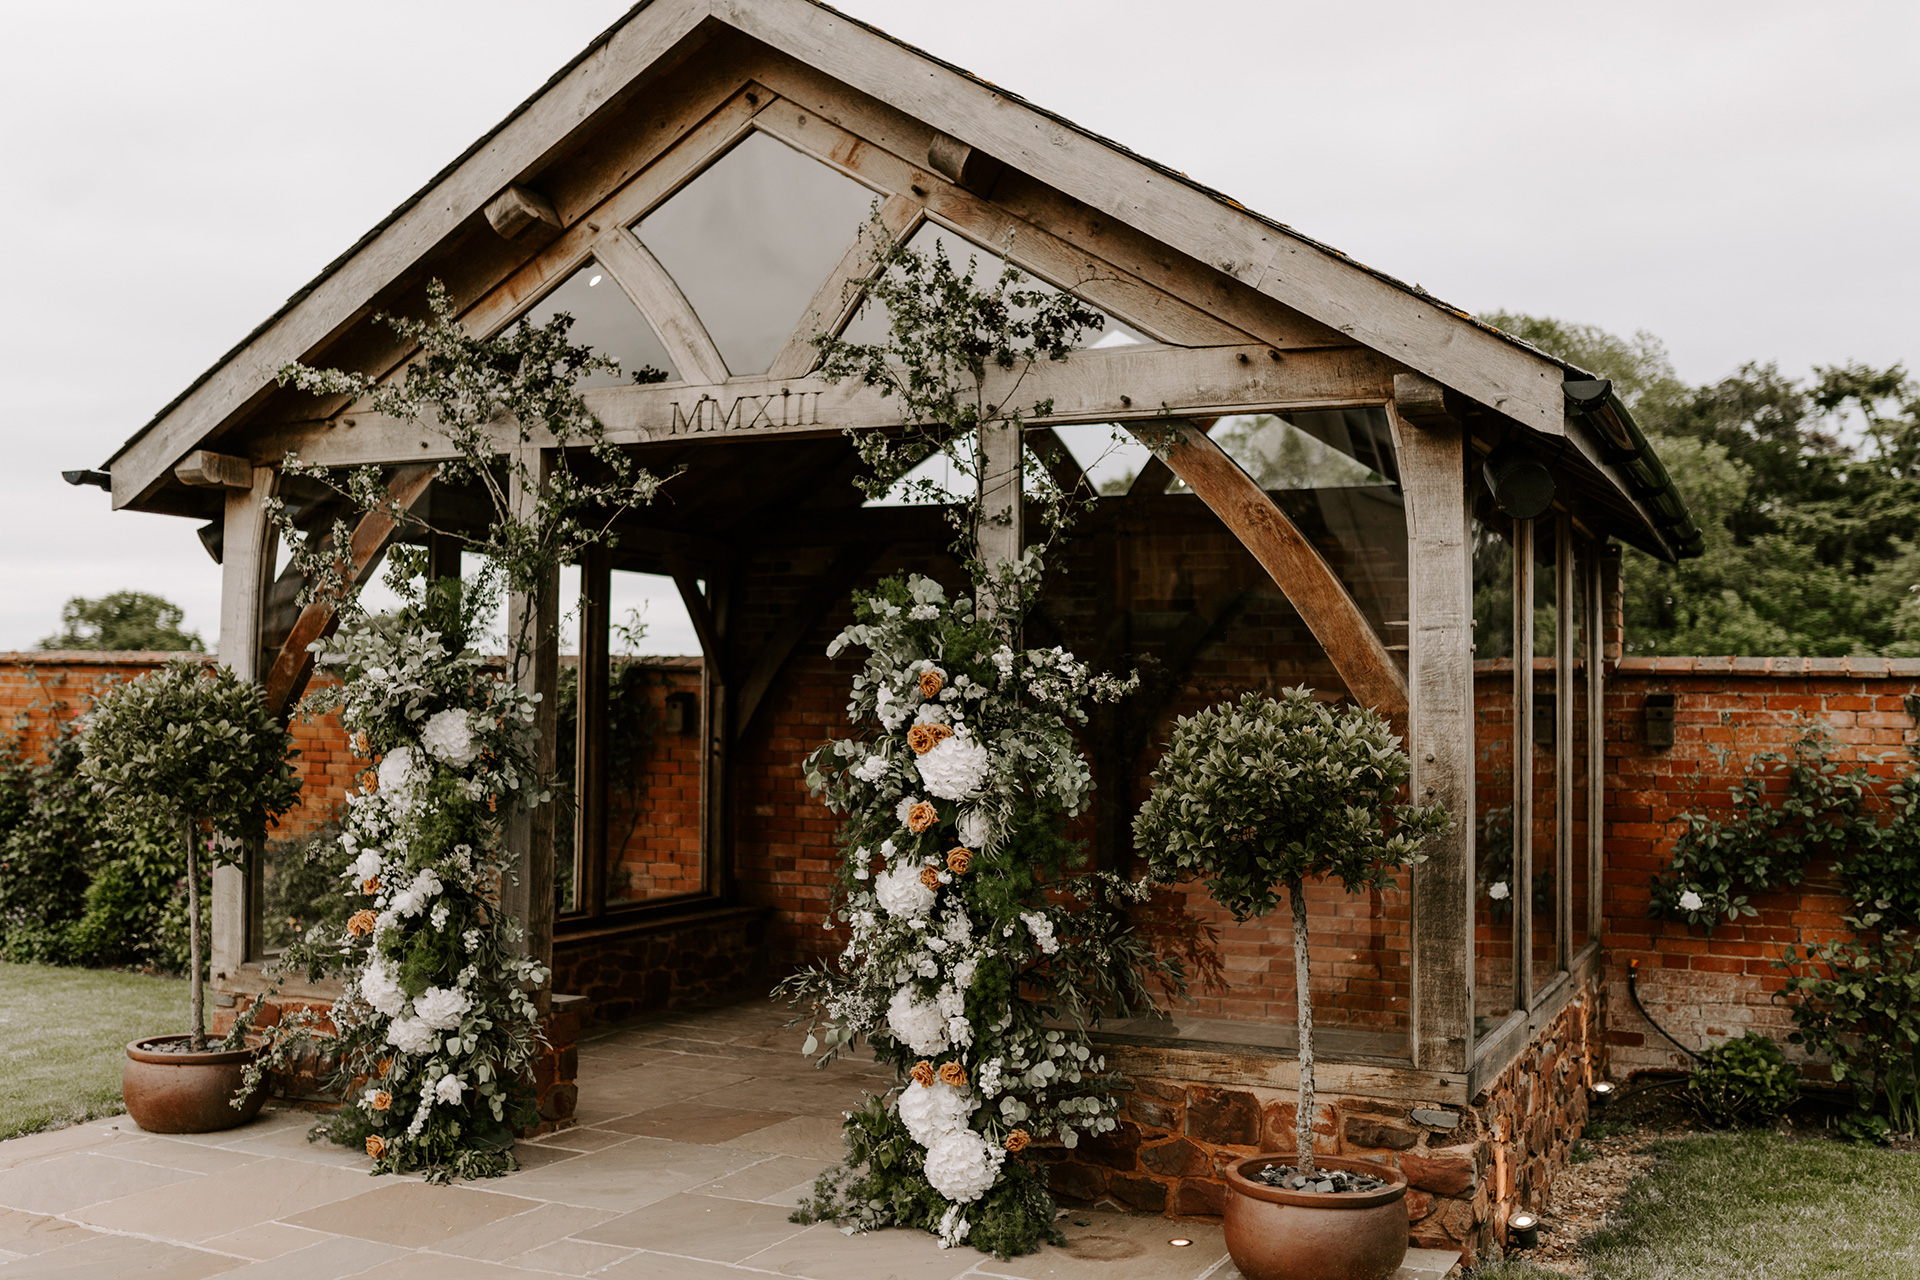 Upton Barn & Walled Garden | Image by Ohh So Wild